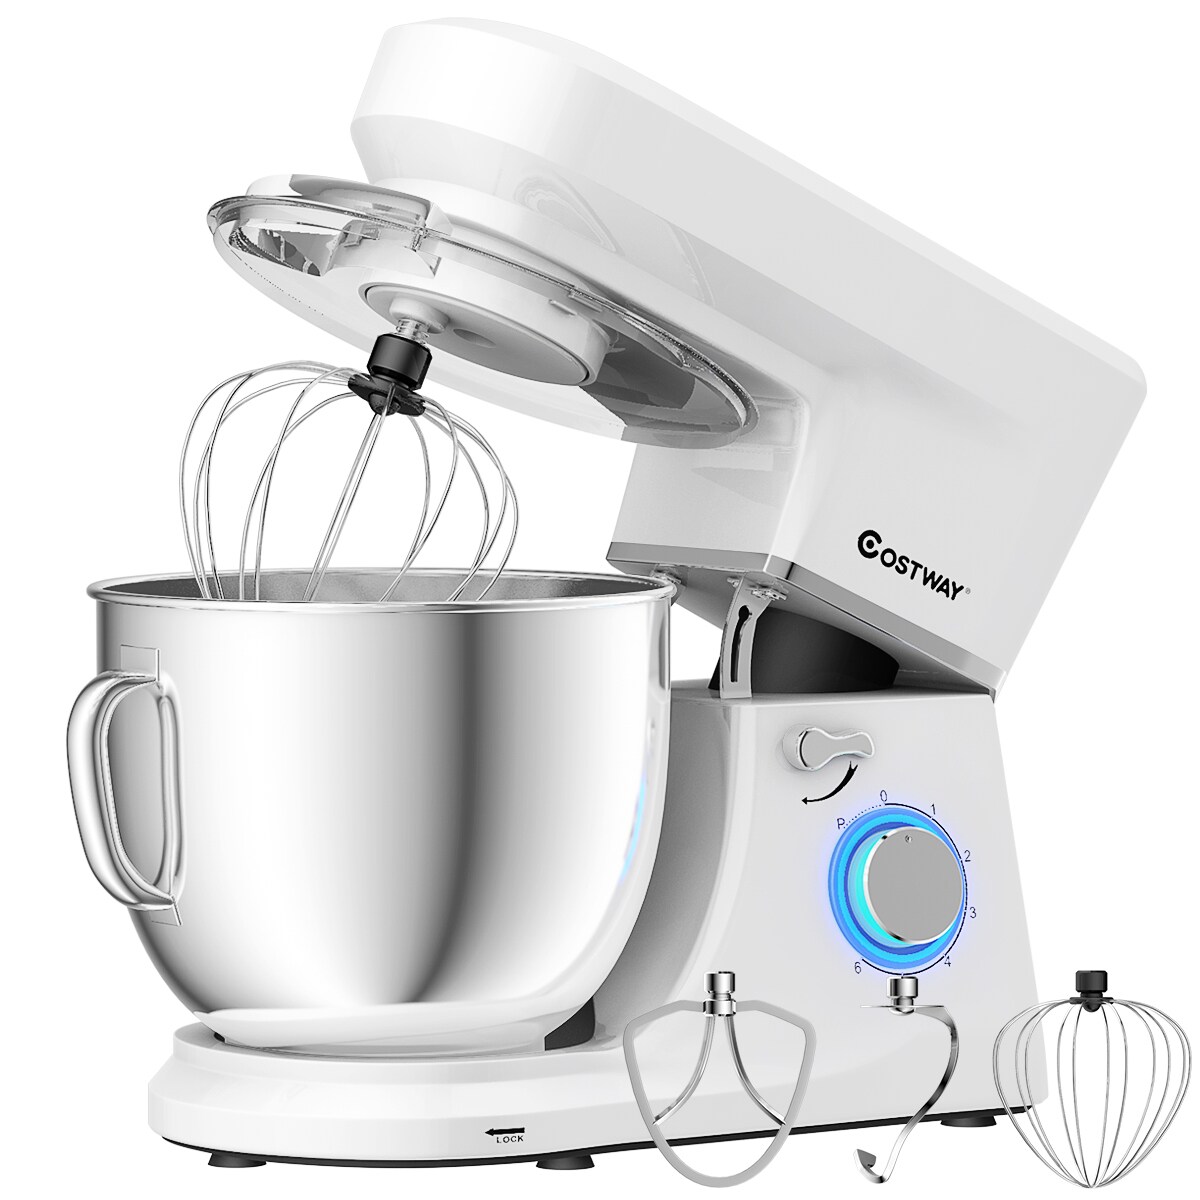 Goplus 7.5-Quart 6-Speed White Commercial/Residential Stand Mixer